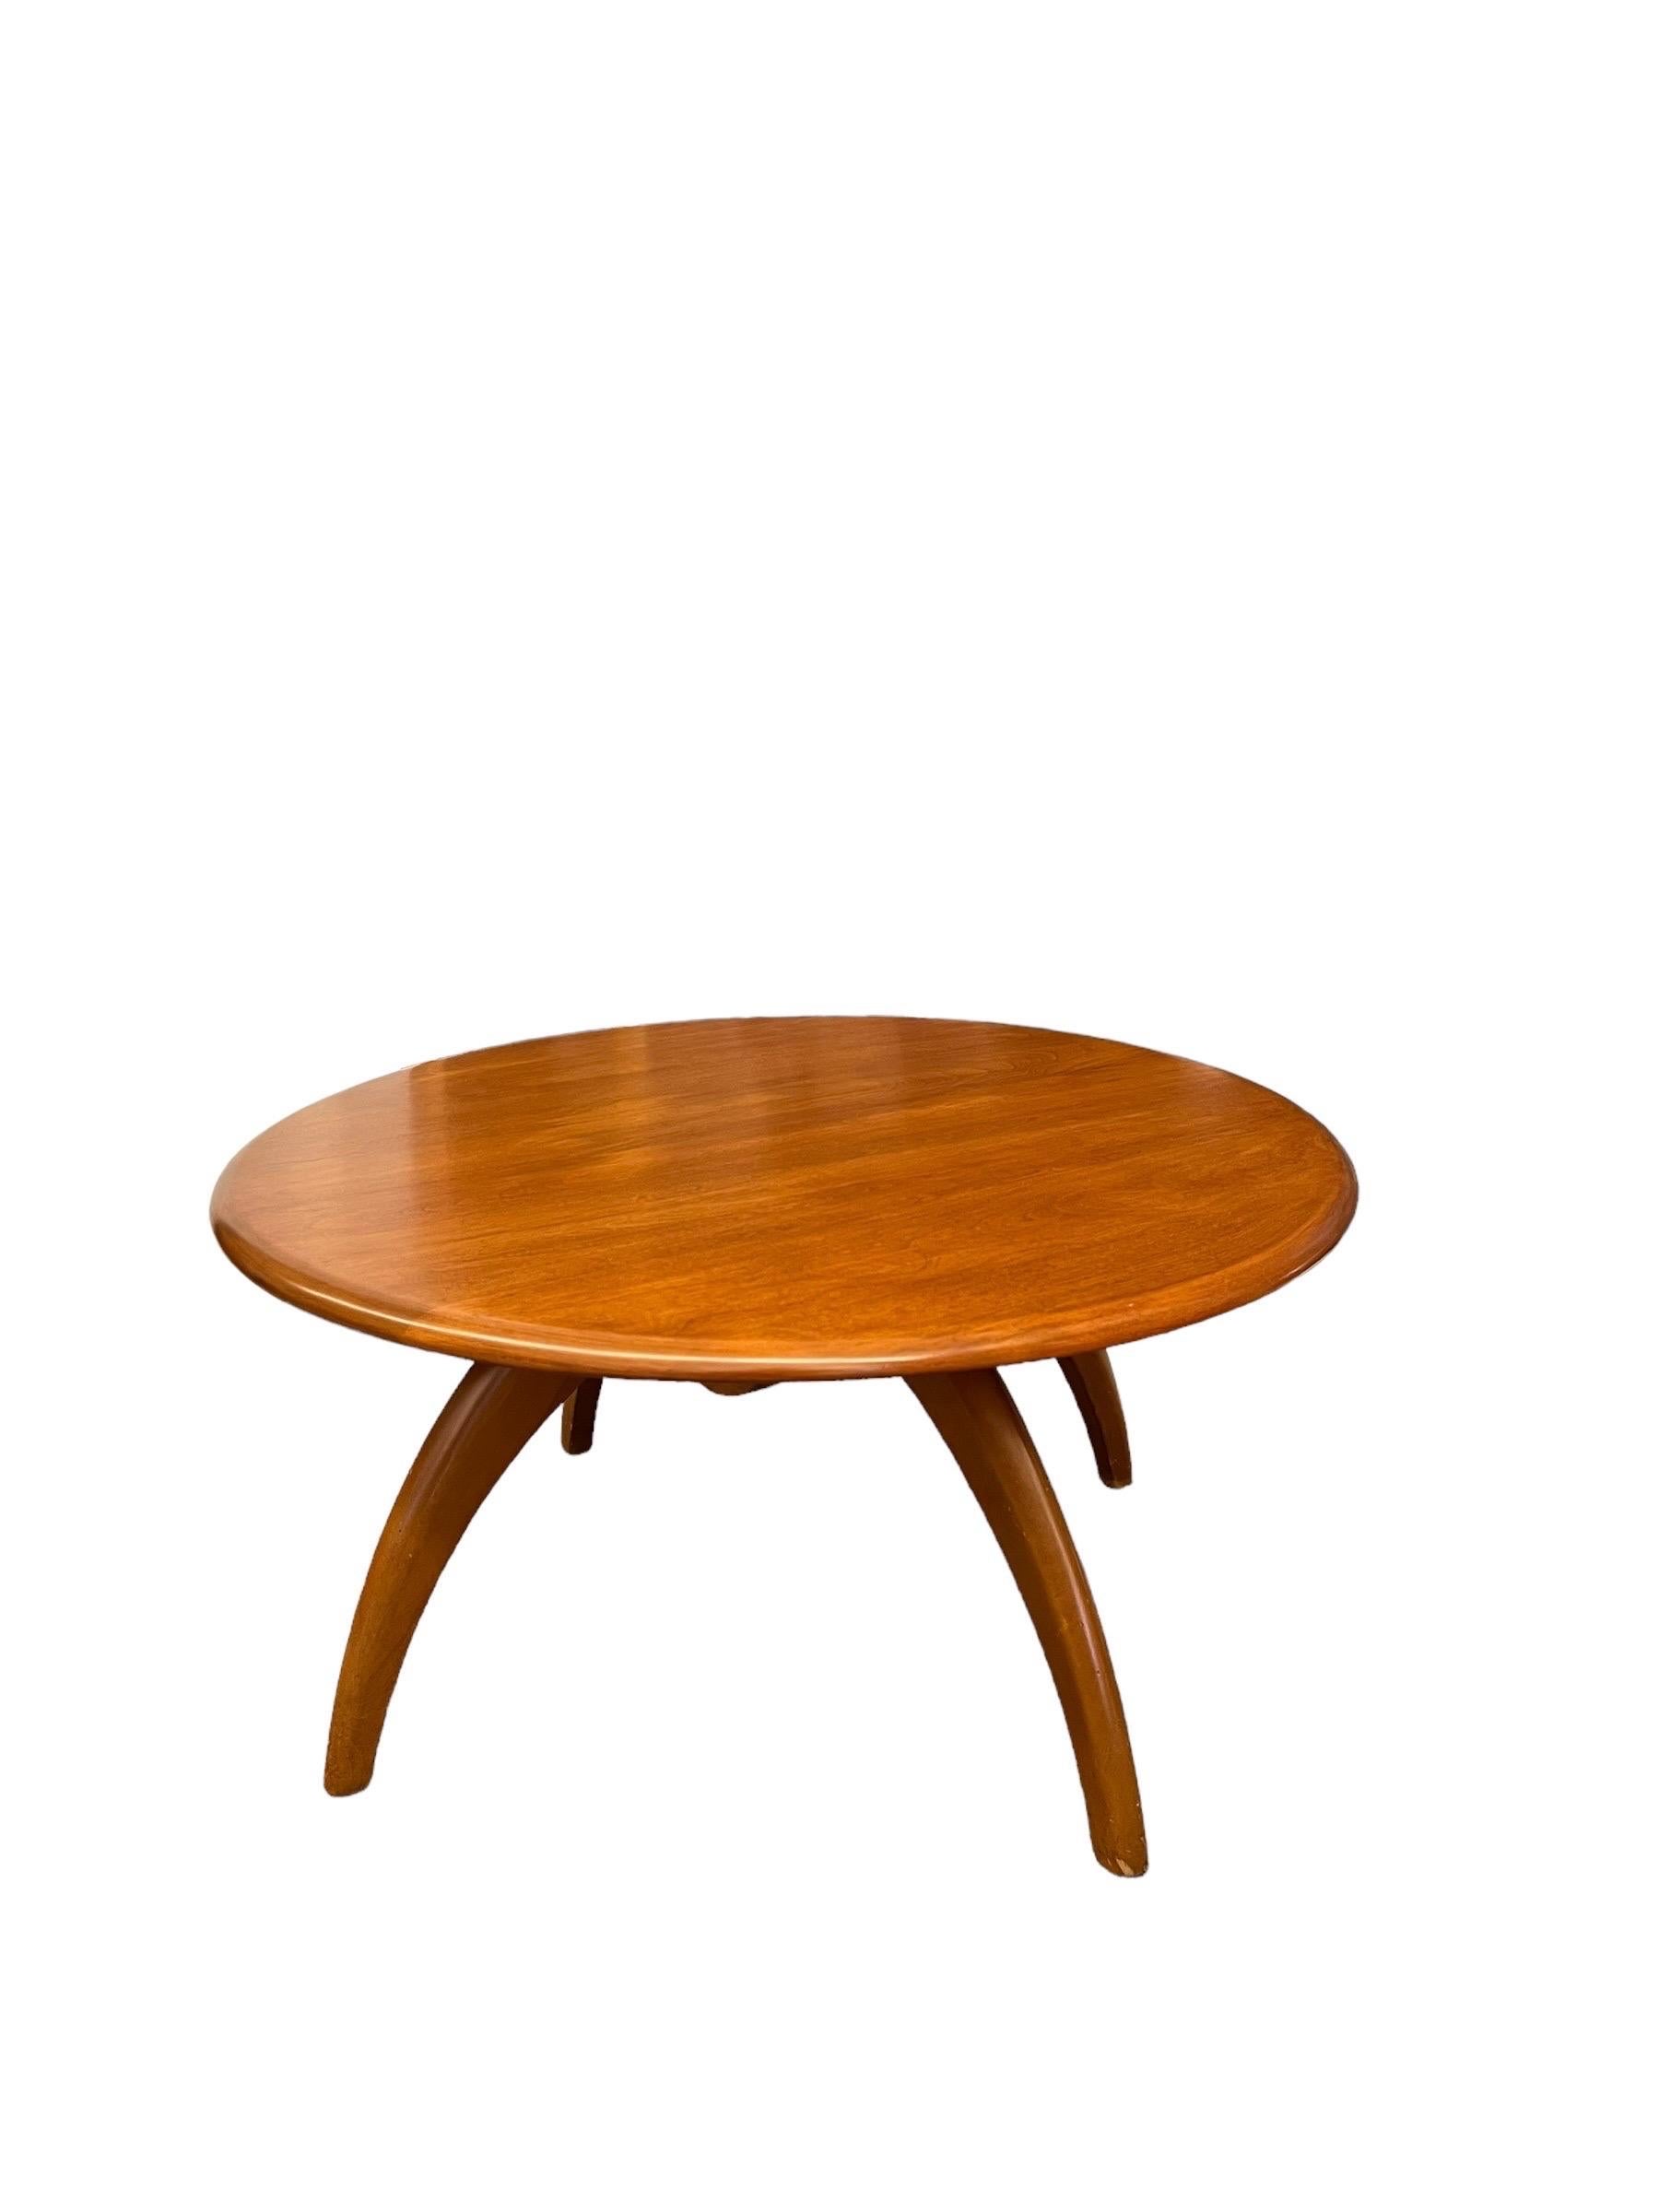 Late 20th Century Vintage Mid Century Modern Solid Maple Wood Coffee Table by Heywood Wakefield .  For Sale